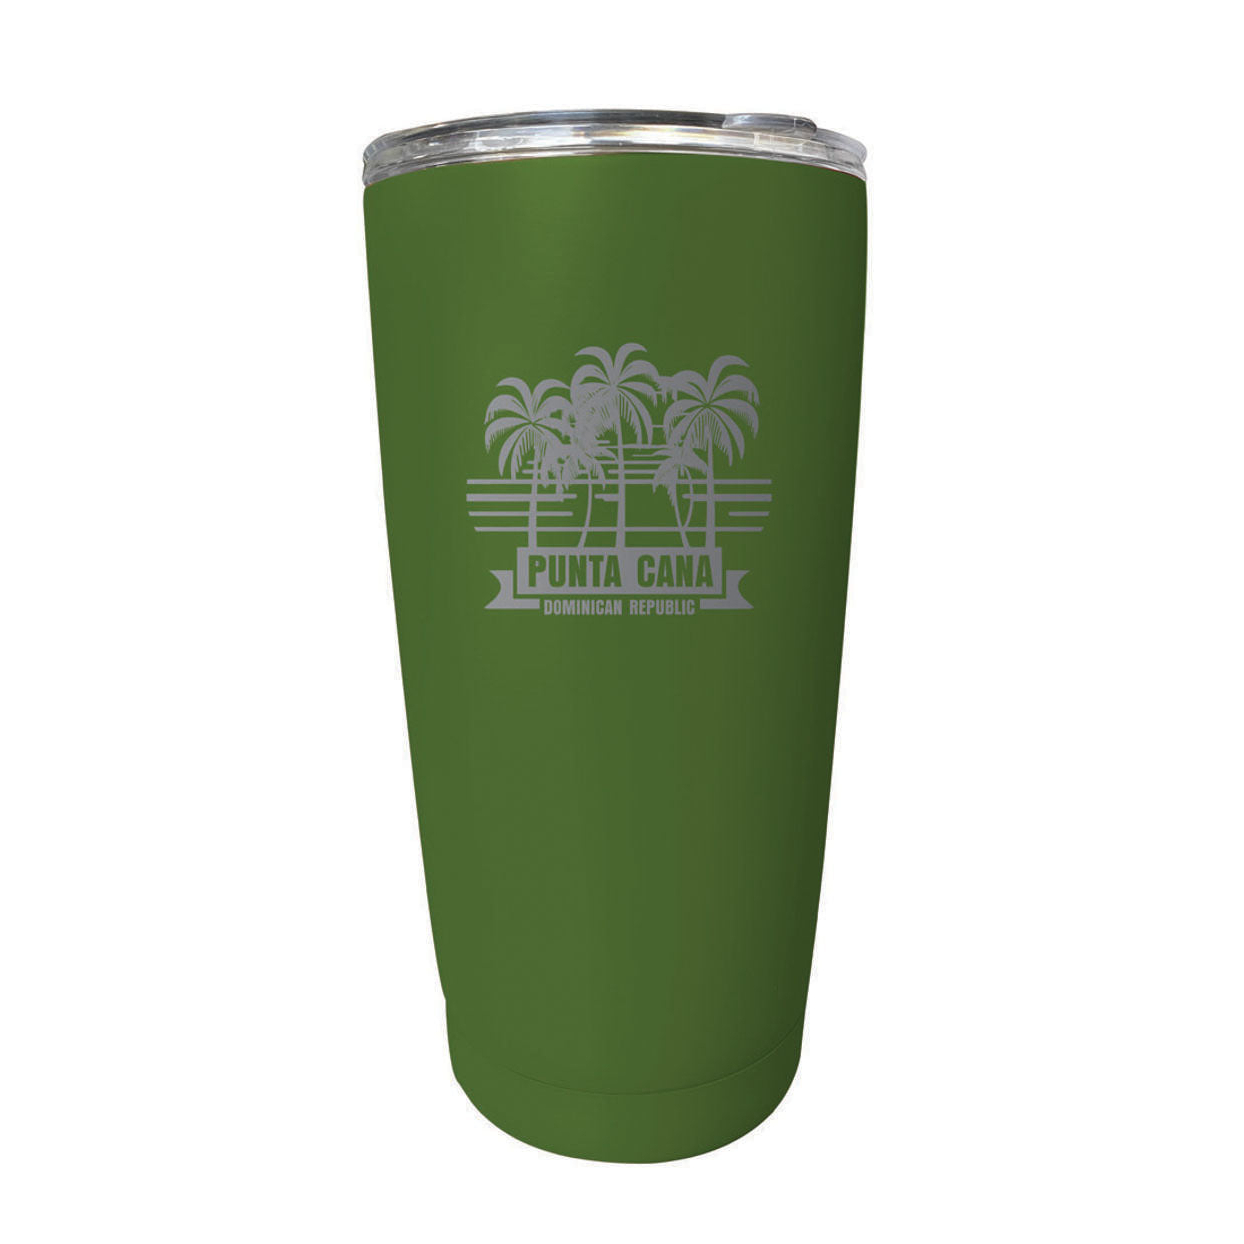 Punta Cana Dominican Republic Souvenir 16 Oz Stainless Steel Insulated Tumbler Etched - Black, PALMS